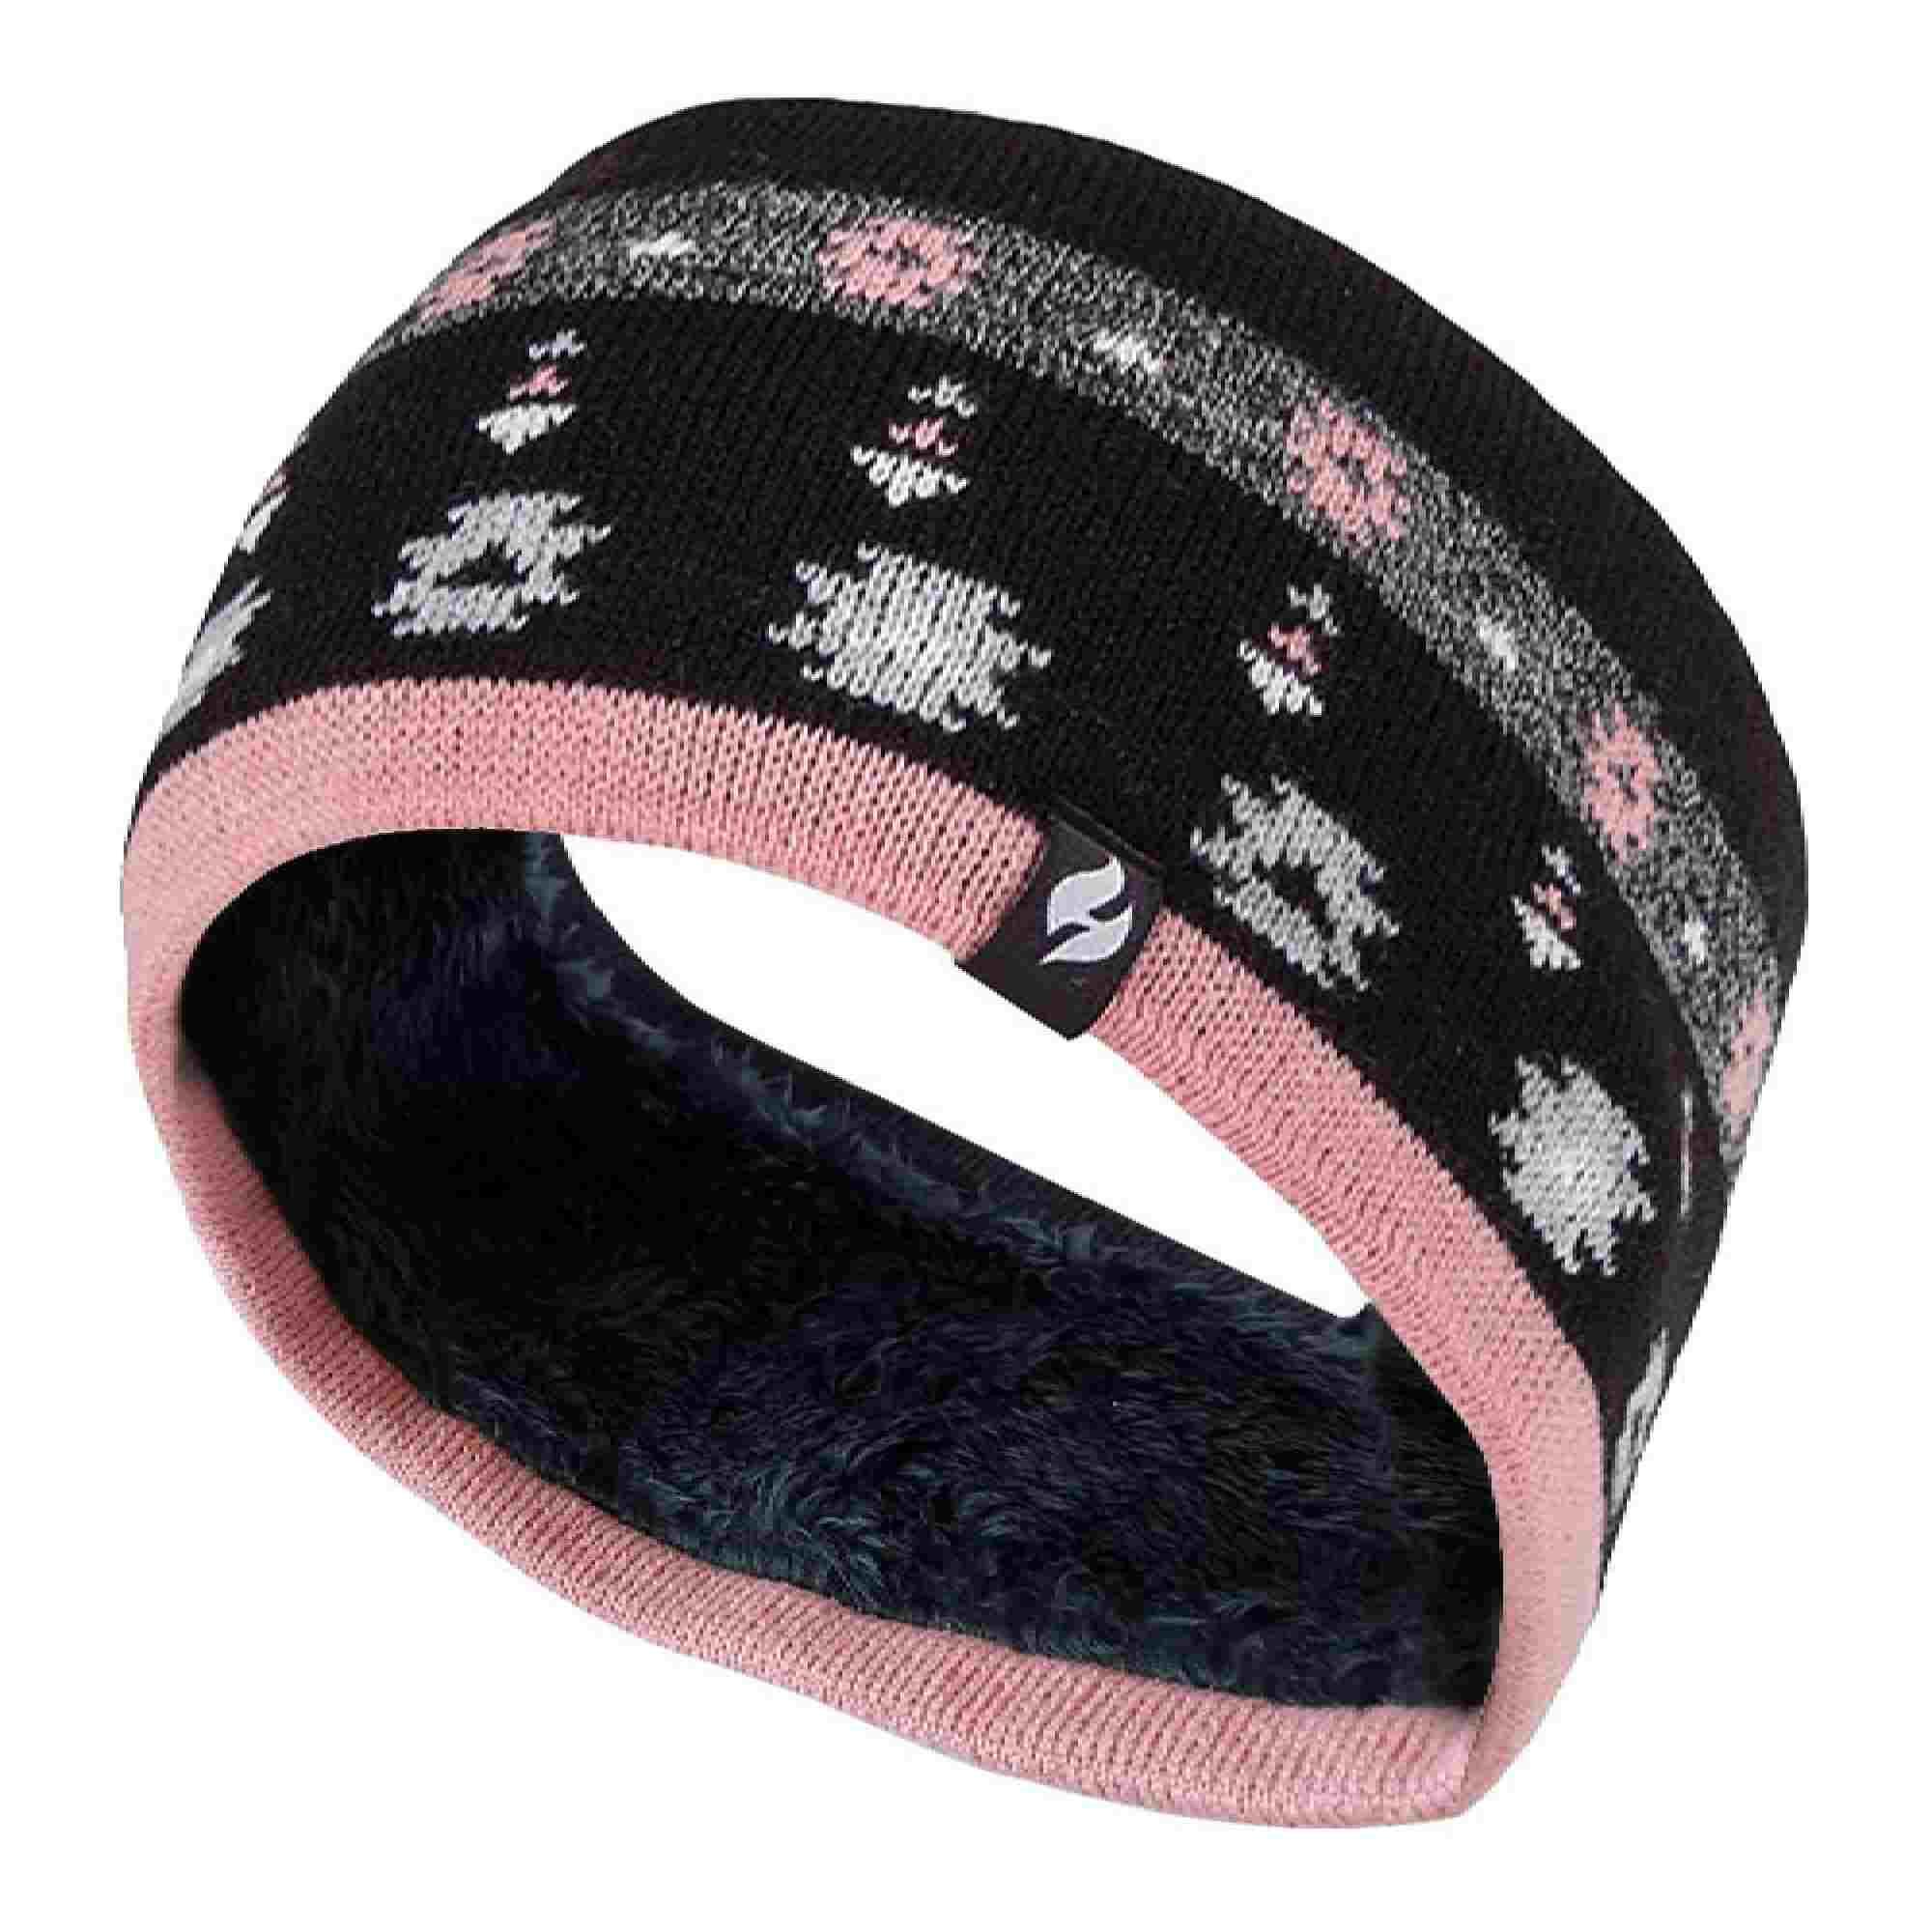 HEAT HOLDERS Ladies Cable Knitted Fleece Lined Thermal Winter Ear Warmer Headband